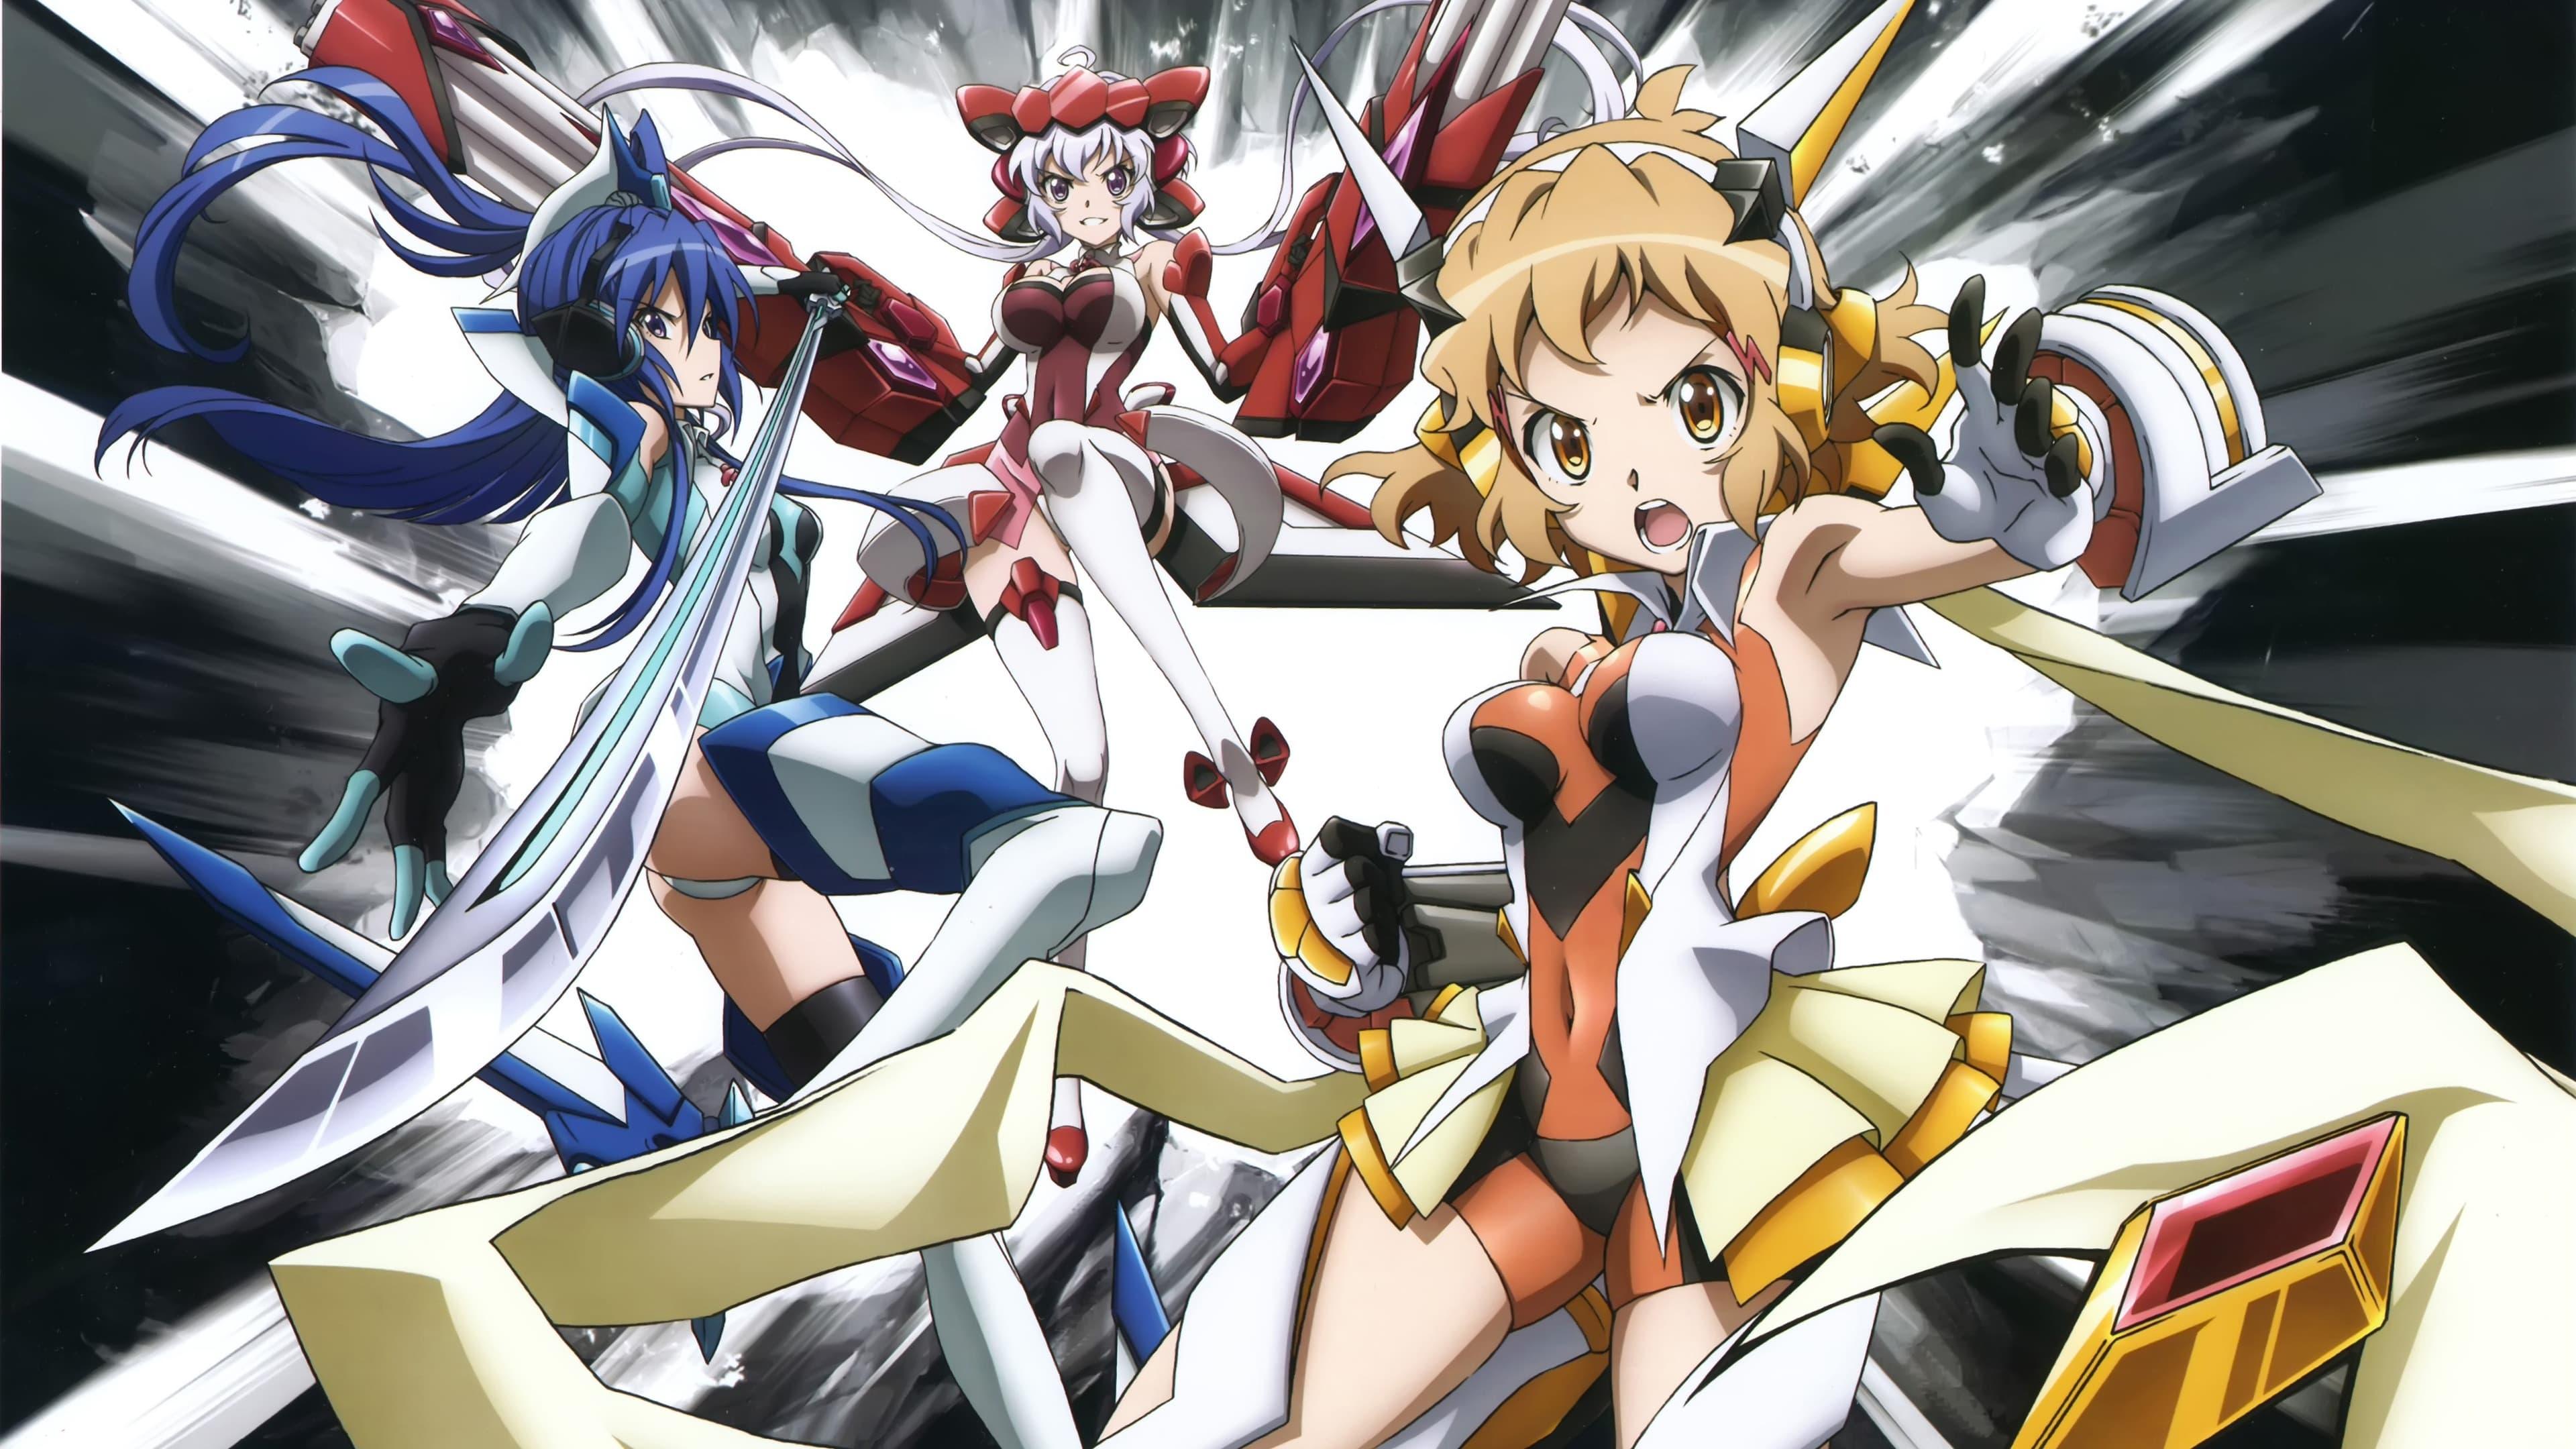 Superb Song of the Valkyries: Symphogear backdrop